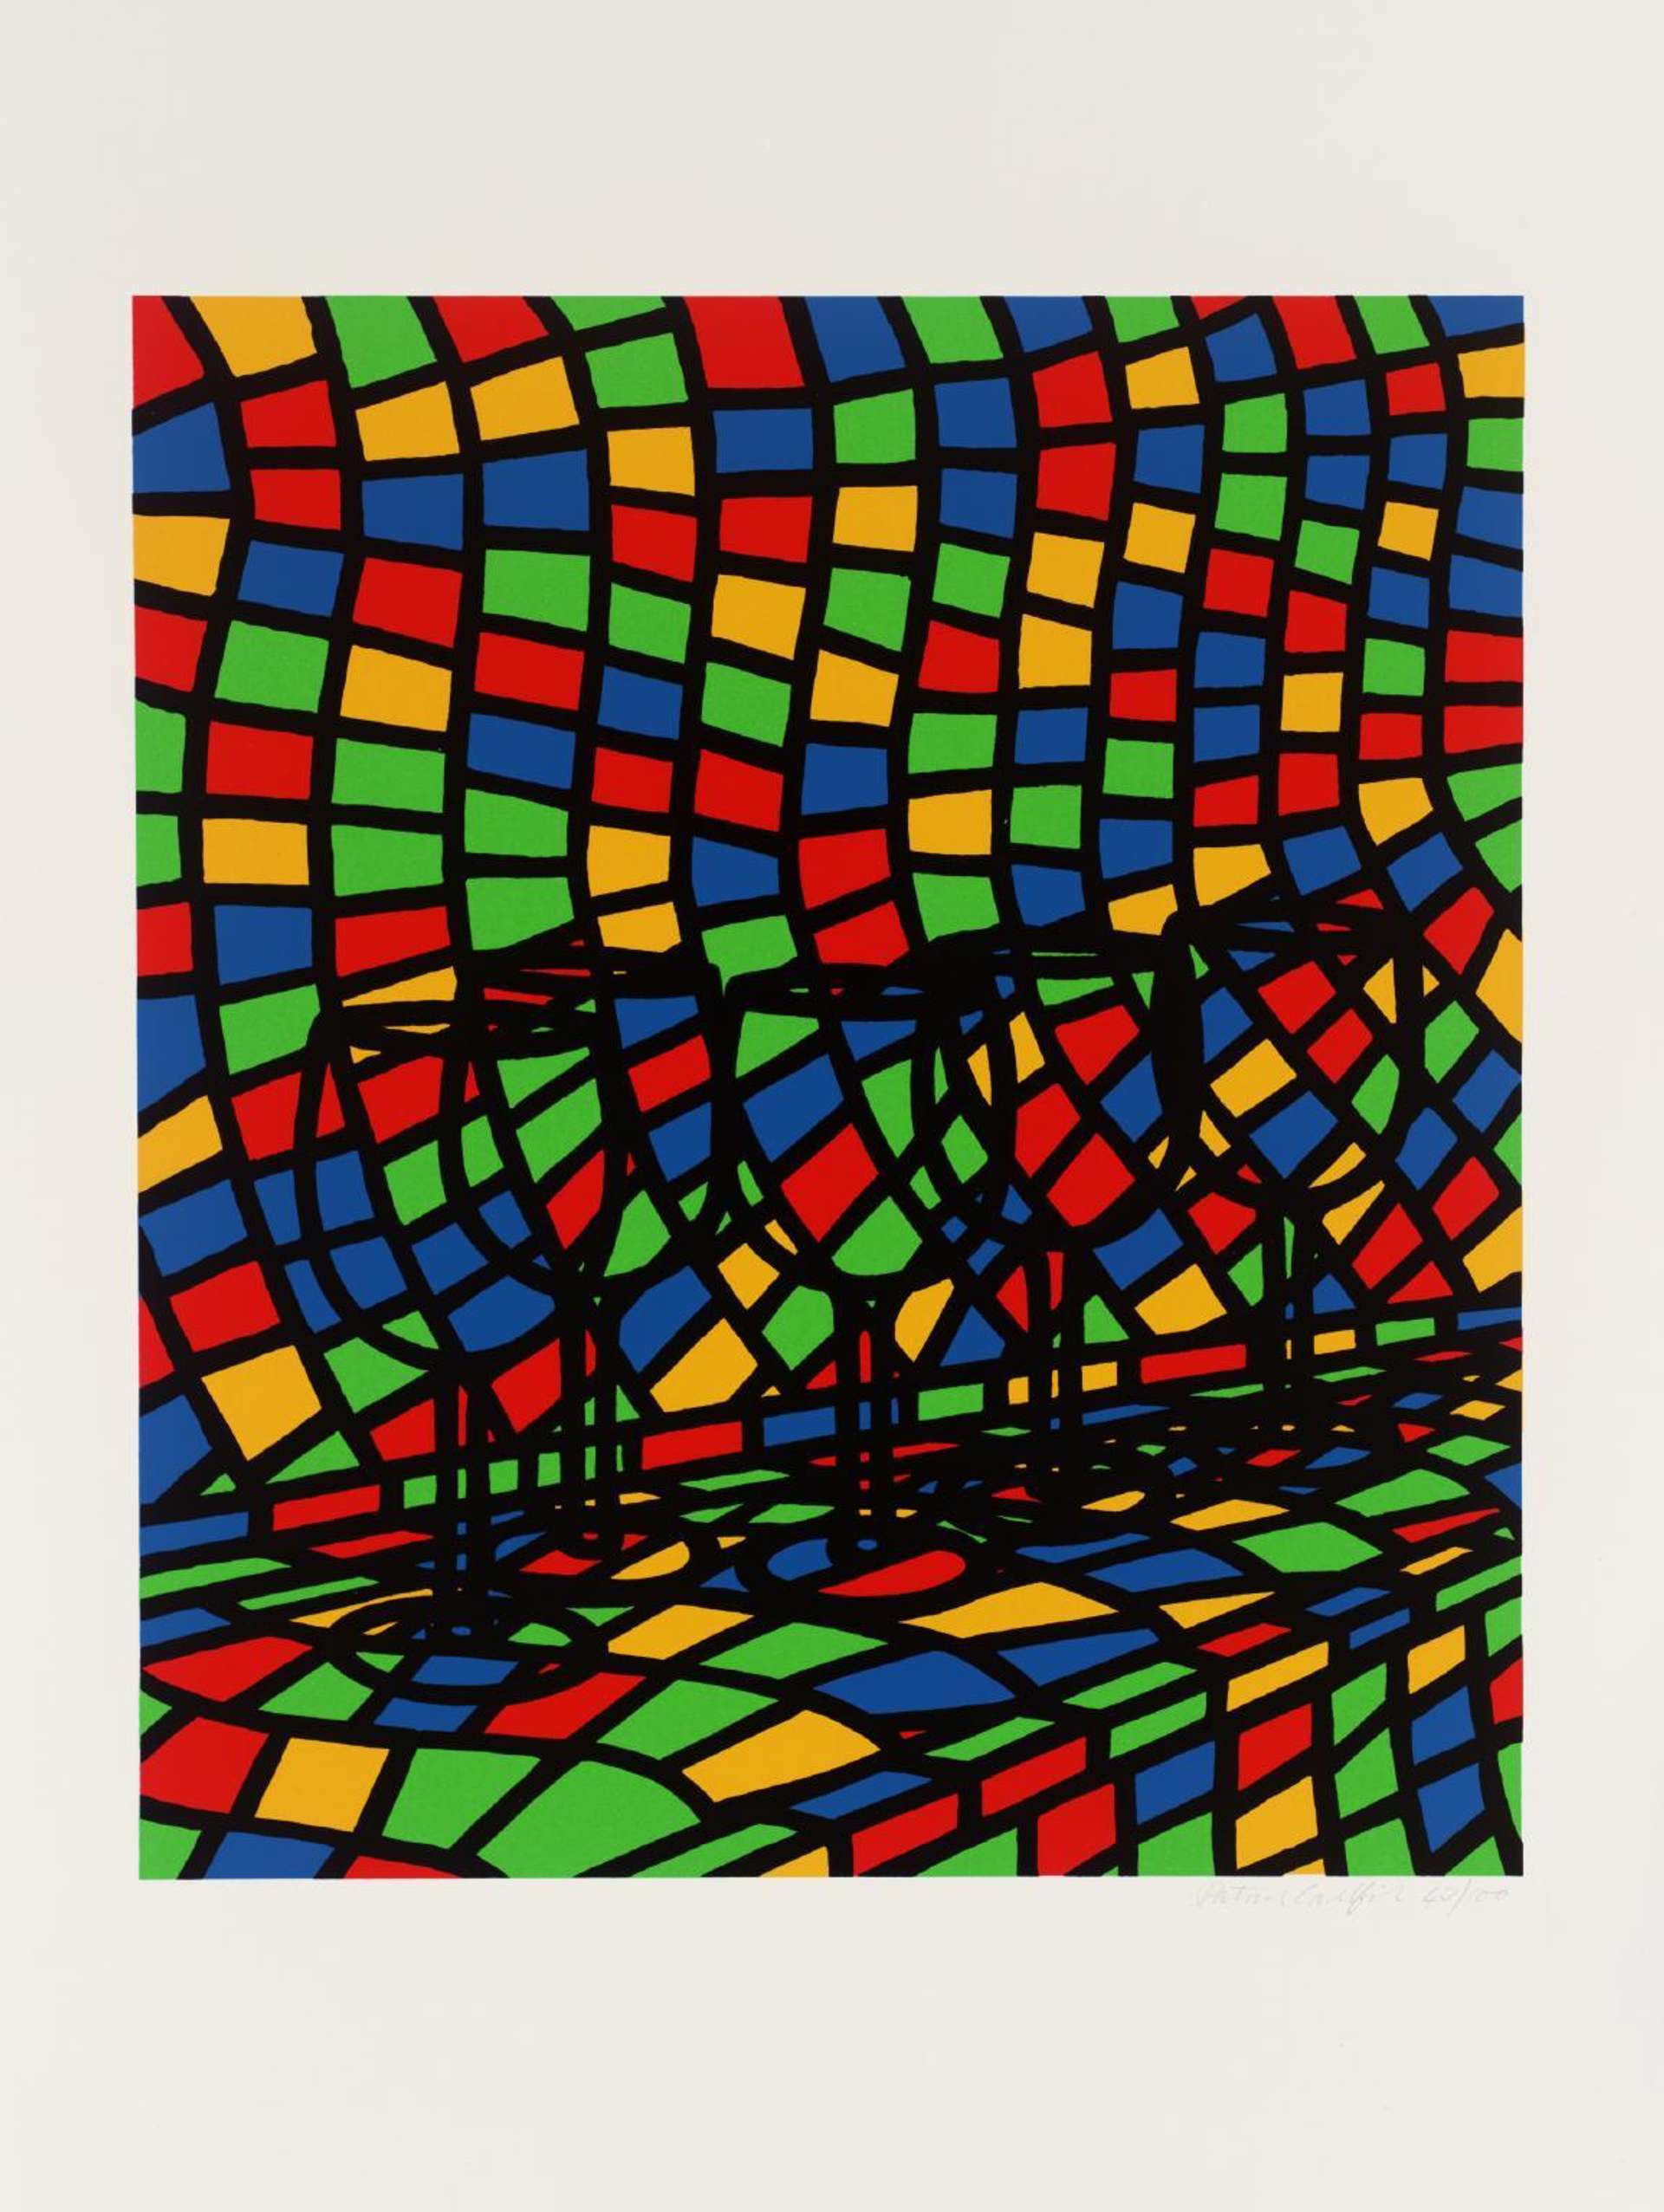 An image of the print ‘All These Confessions…’ by artist Patrick Caulfield. It depicts the outline of five wine glasses, transparent against a background composed of colourful squares.